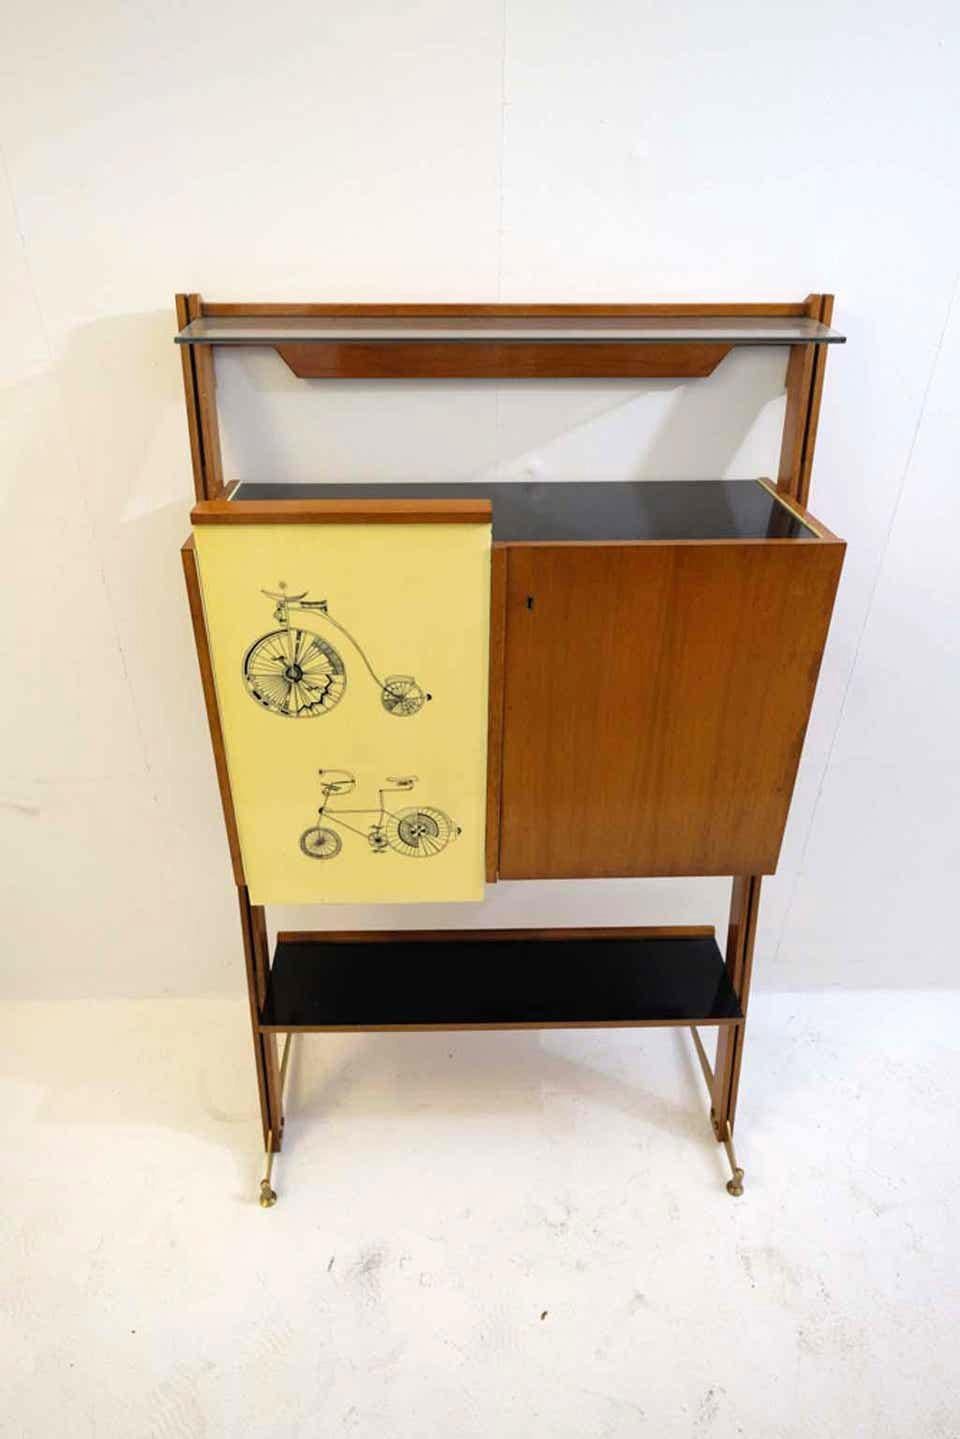 Midcentury Italian bar with original bicycle printed yellow Formica panels on the front.
The body of the cabinet is made in oakwood, with yellow Formica lining on the interior as well as a black Formica plate on the inside of a foldaway table